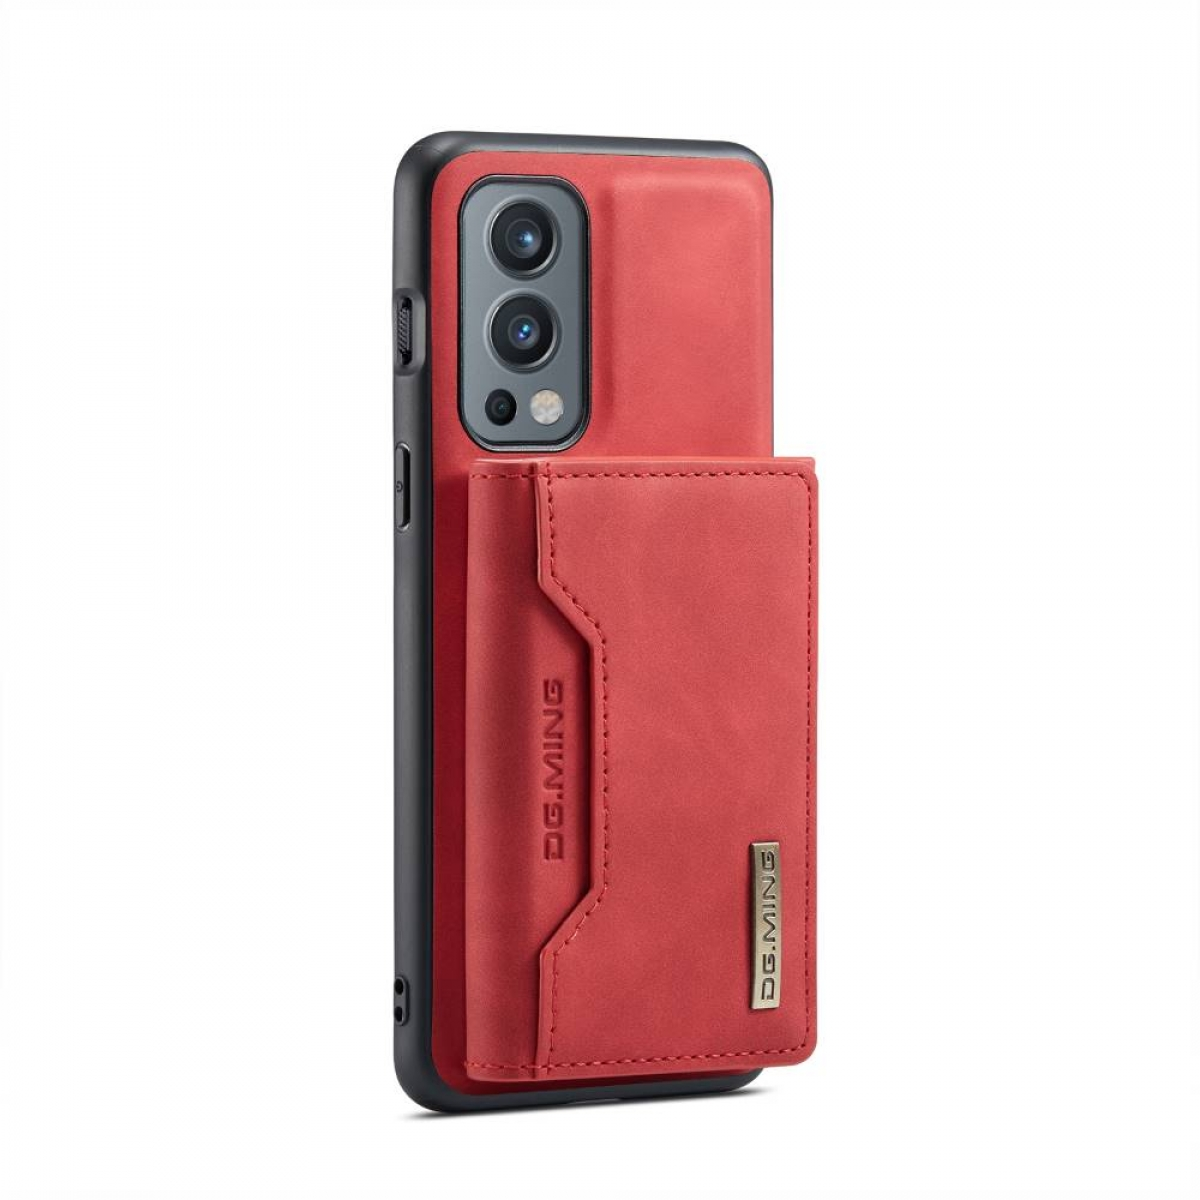 DG MING M2 2 5G, 2in1, OnePlus, Nord Rot Backcover